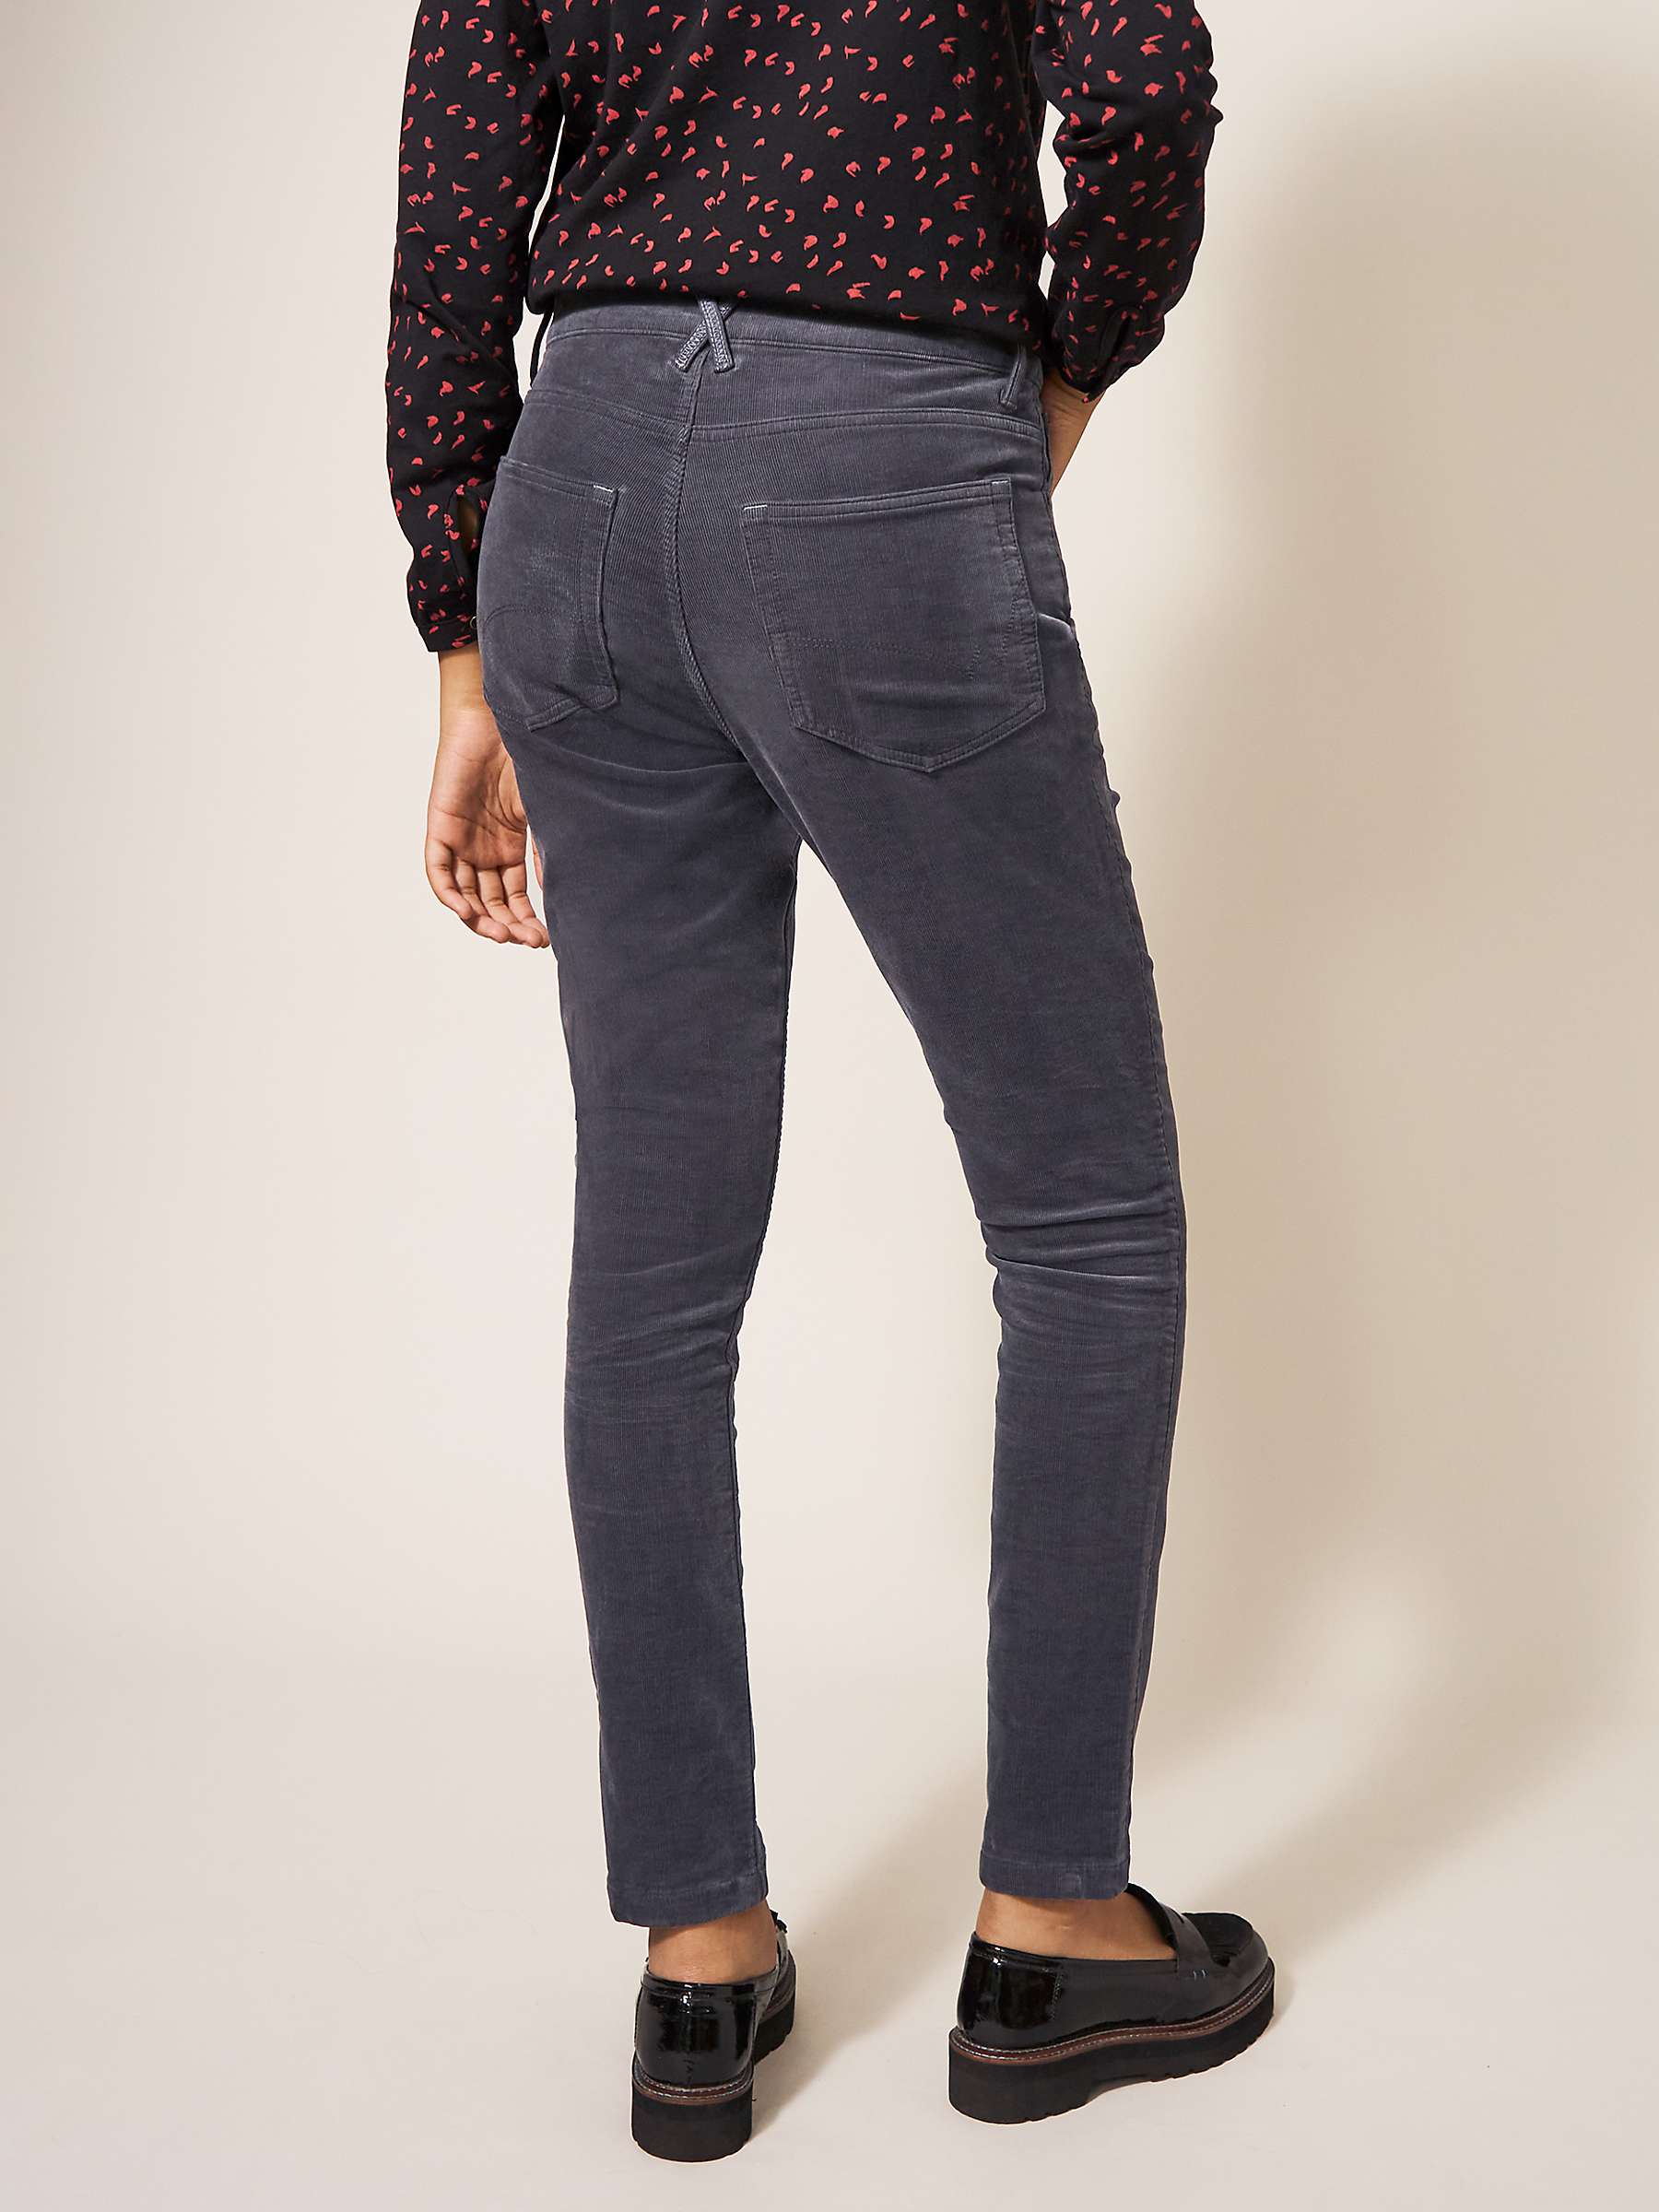 Buy White Stuff Amelia Skinny Cord Trousers, Mid Grey Online at johnlewis.com